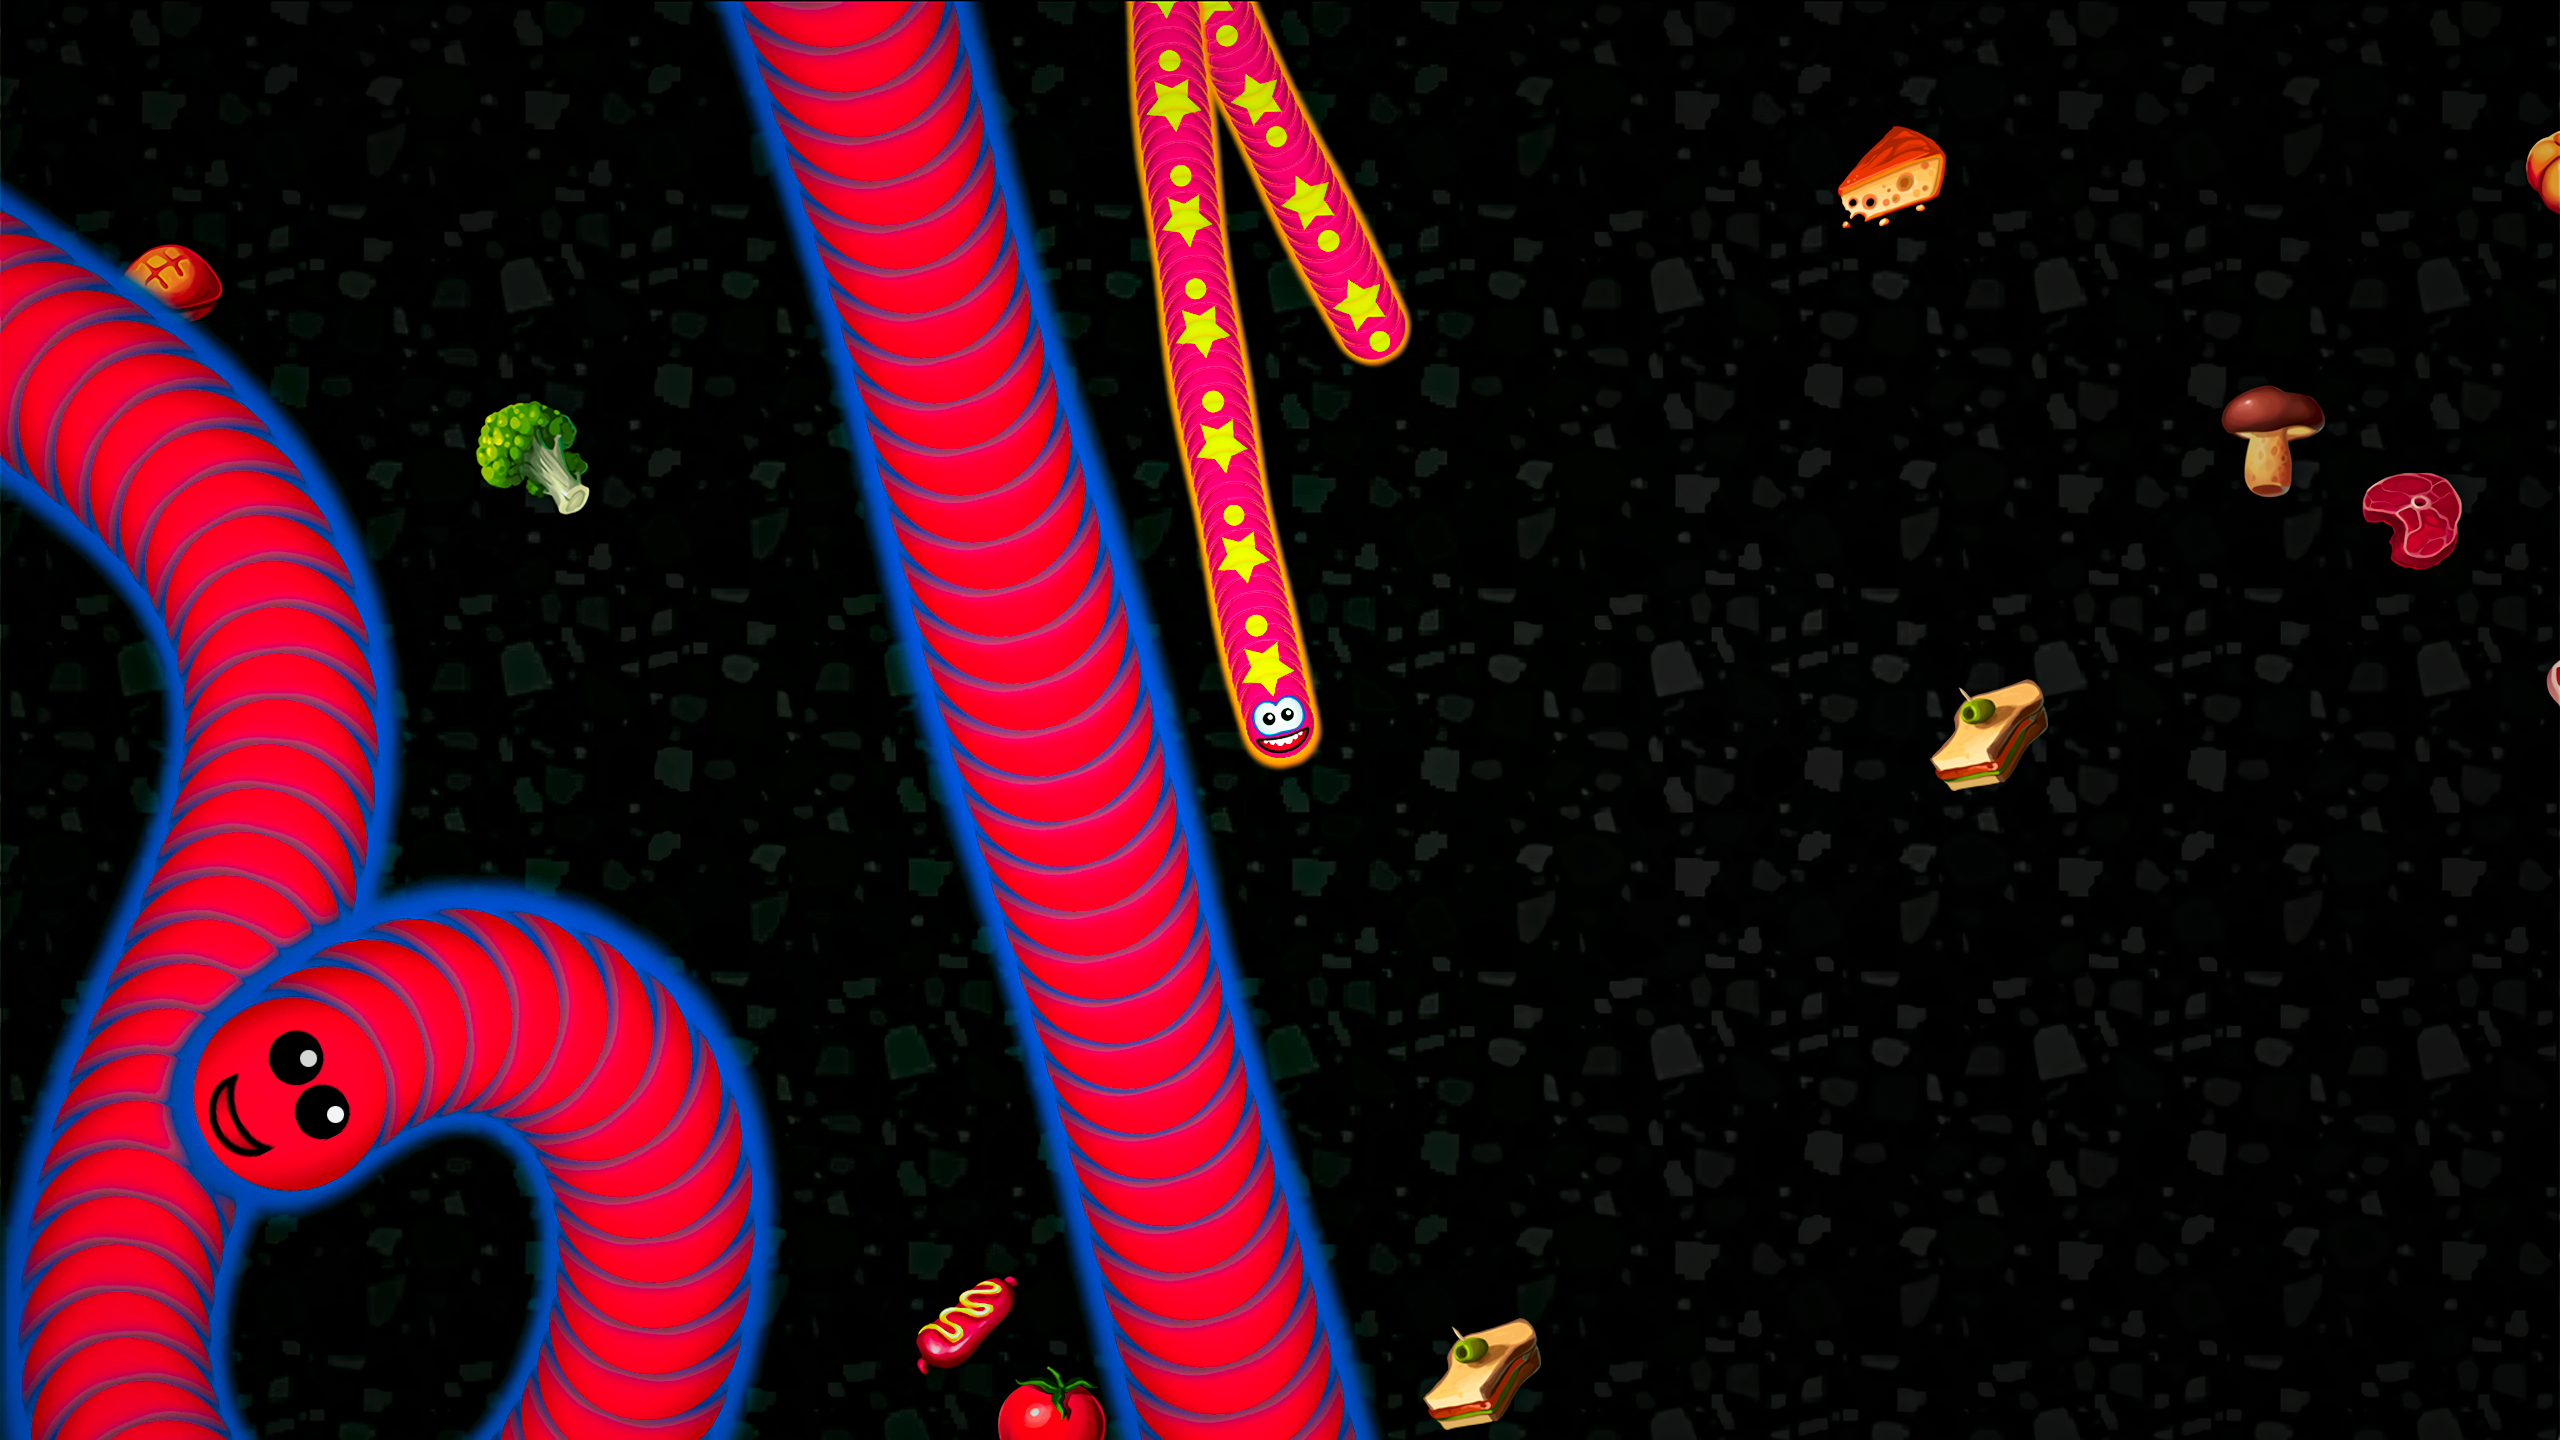 Snake io game worm zone online android iOS apk download for free-TapTap